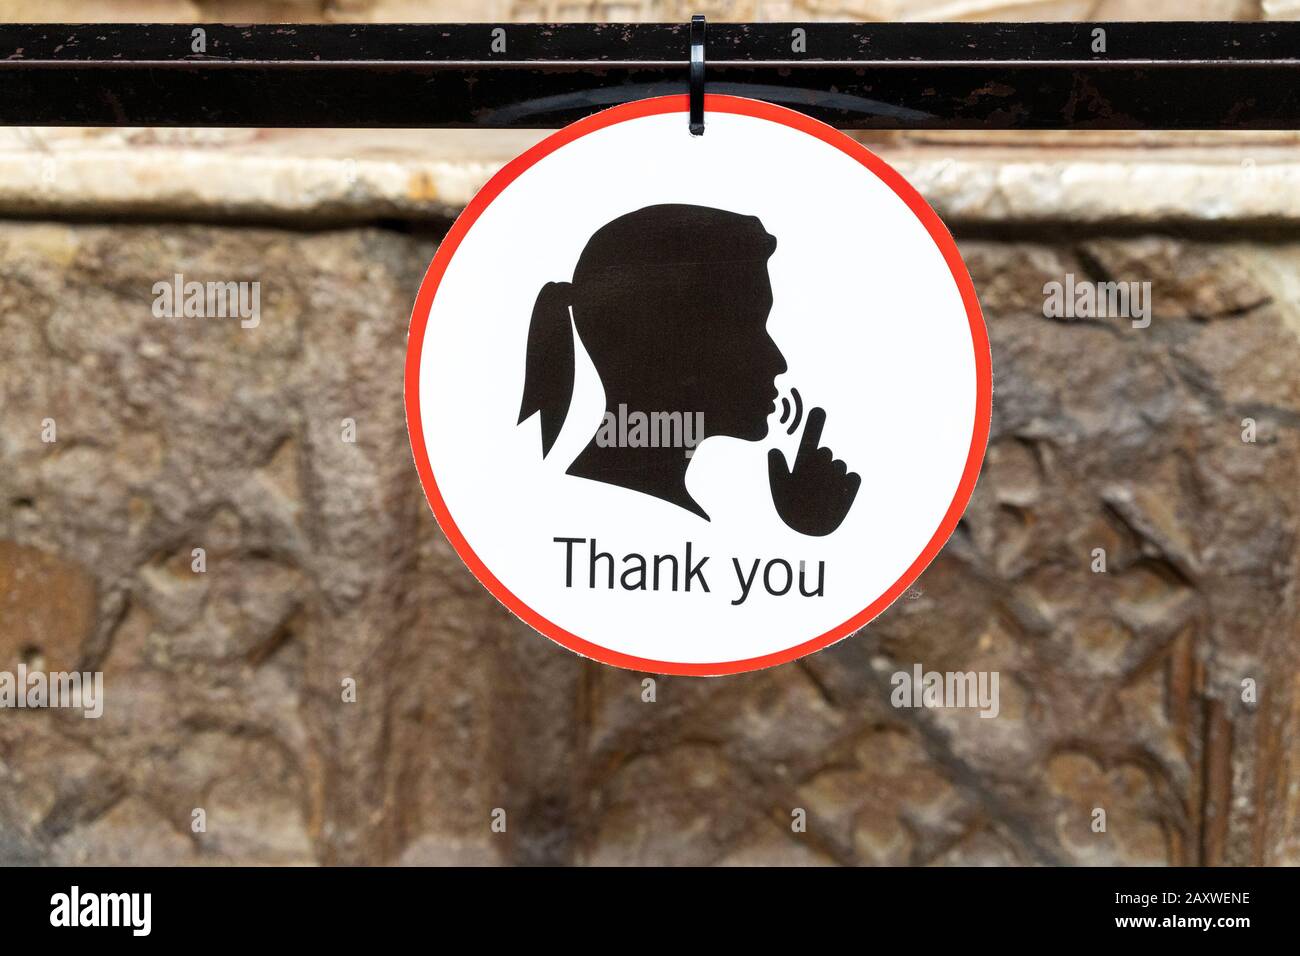 Round sign with graphic of a persons head and hand indicating a request for silence Stock Photo